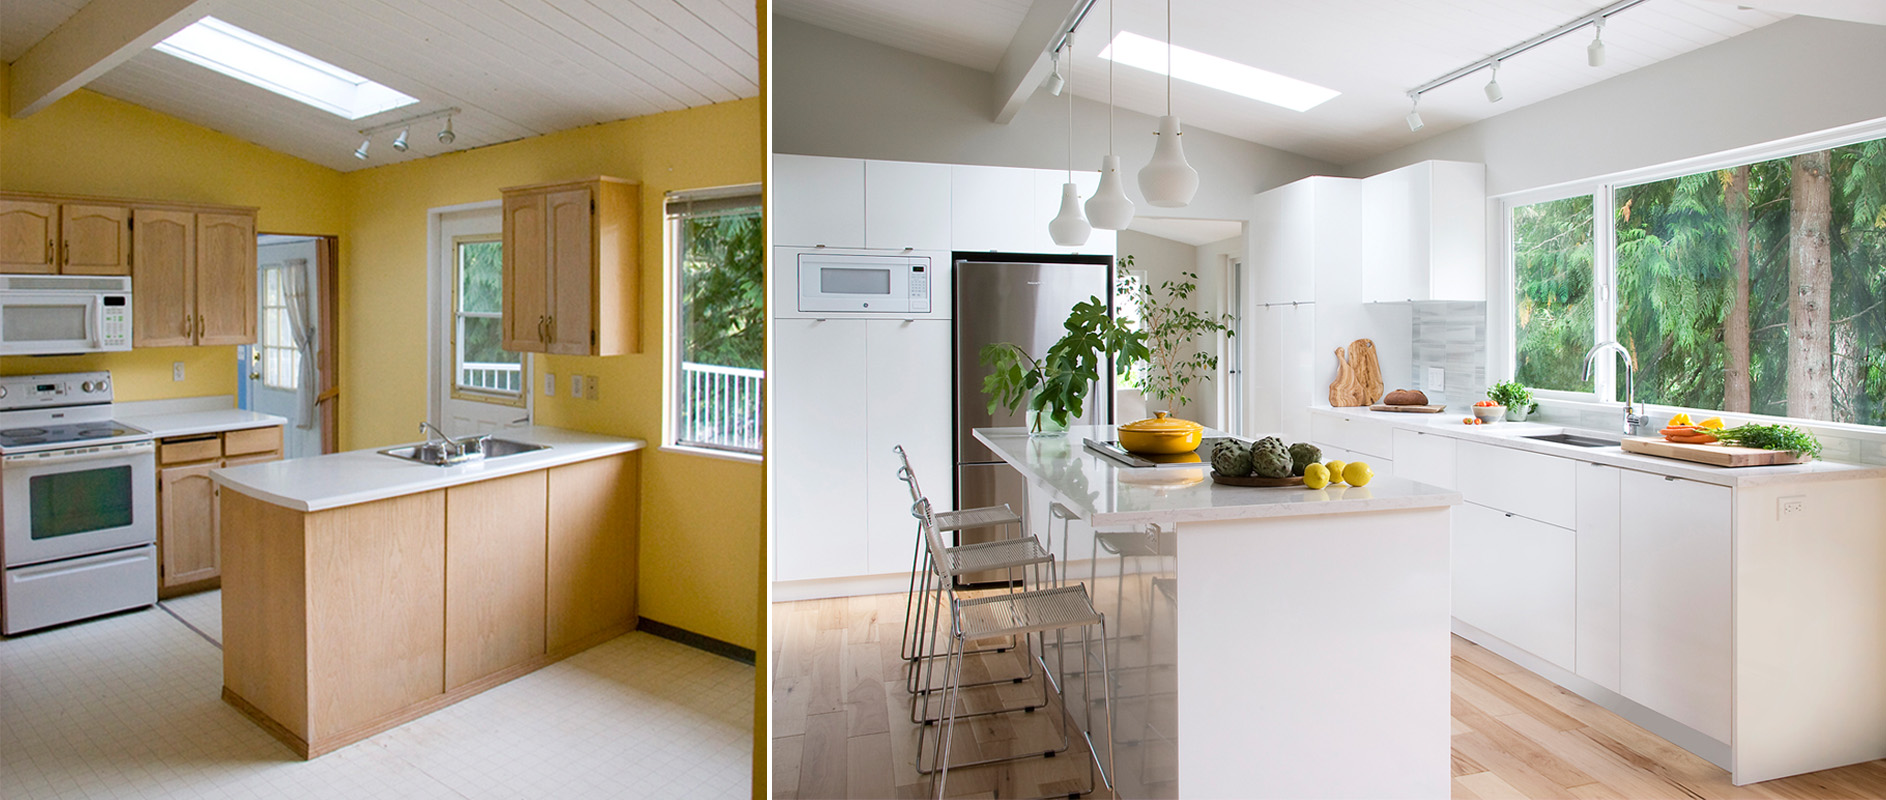 White kitchen before and after.jpg